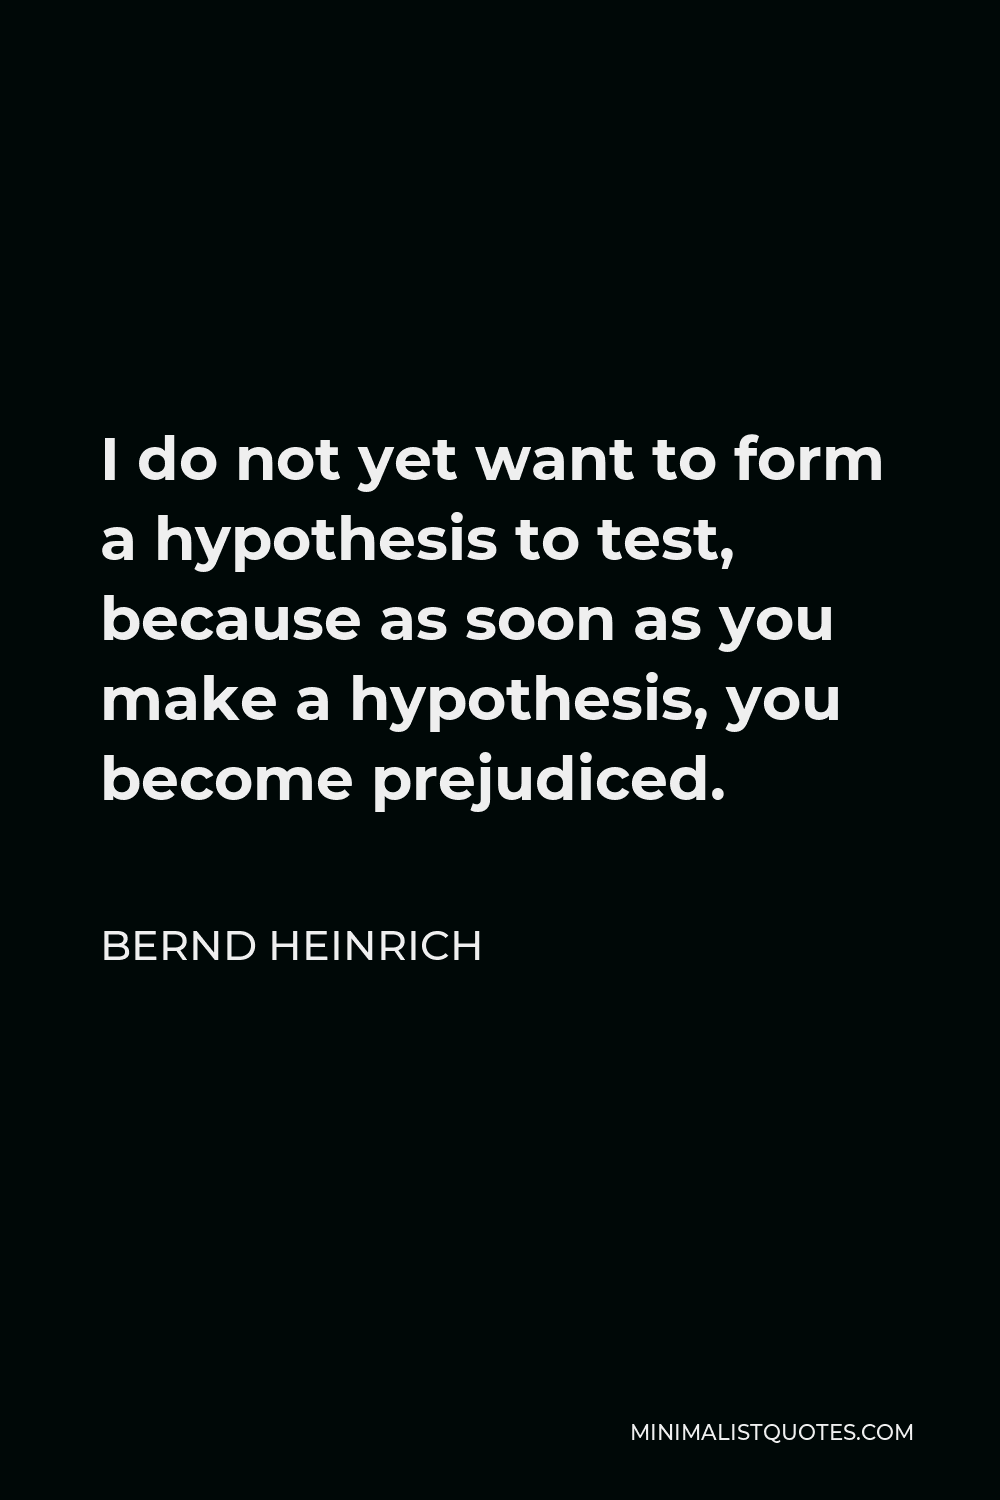 Bernd Heinrich Quote - I do not yet want to form a hypothesis to test, because as soon as you make a hypothesis, you become prejudiced.